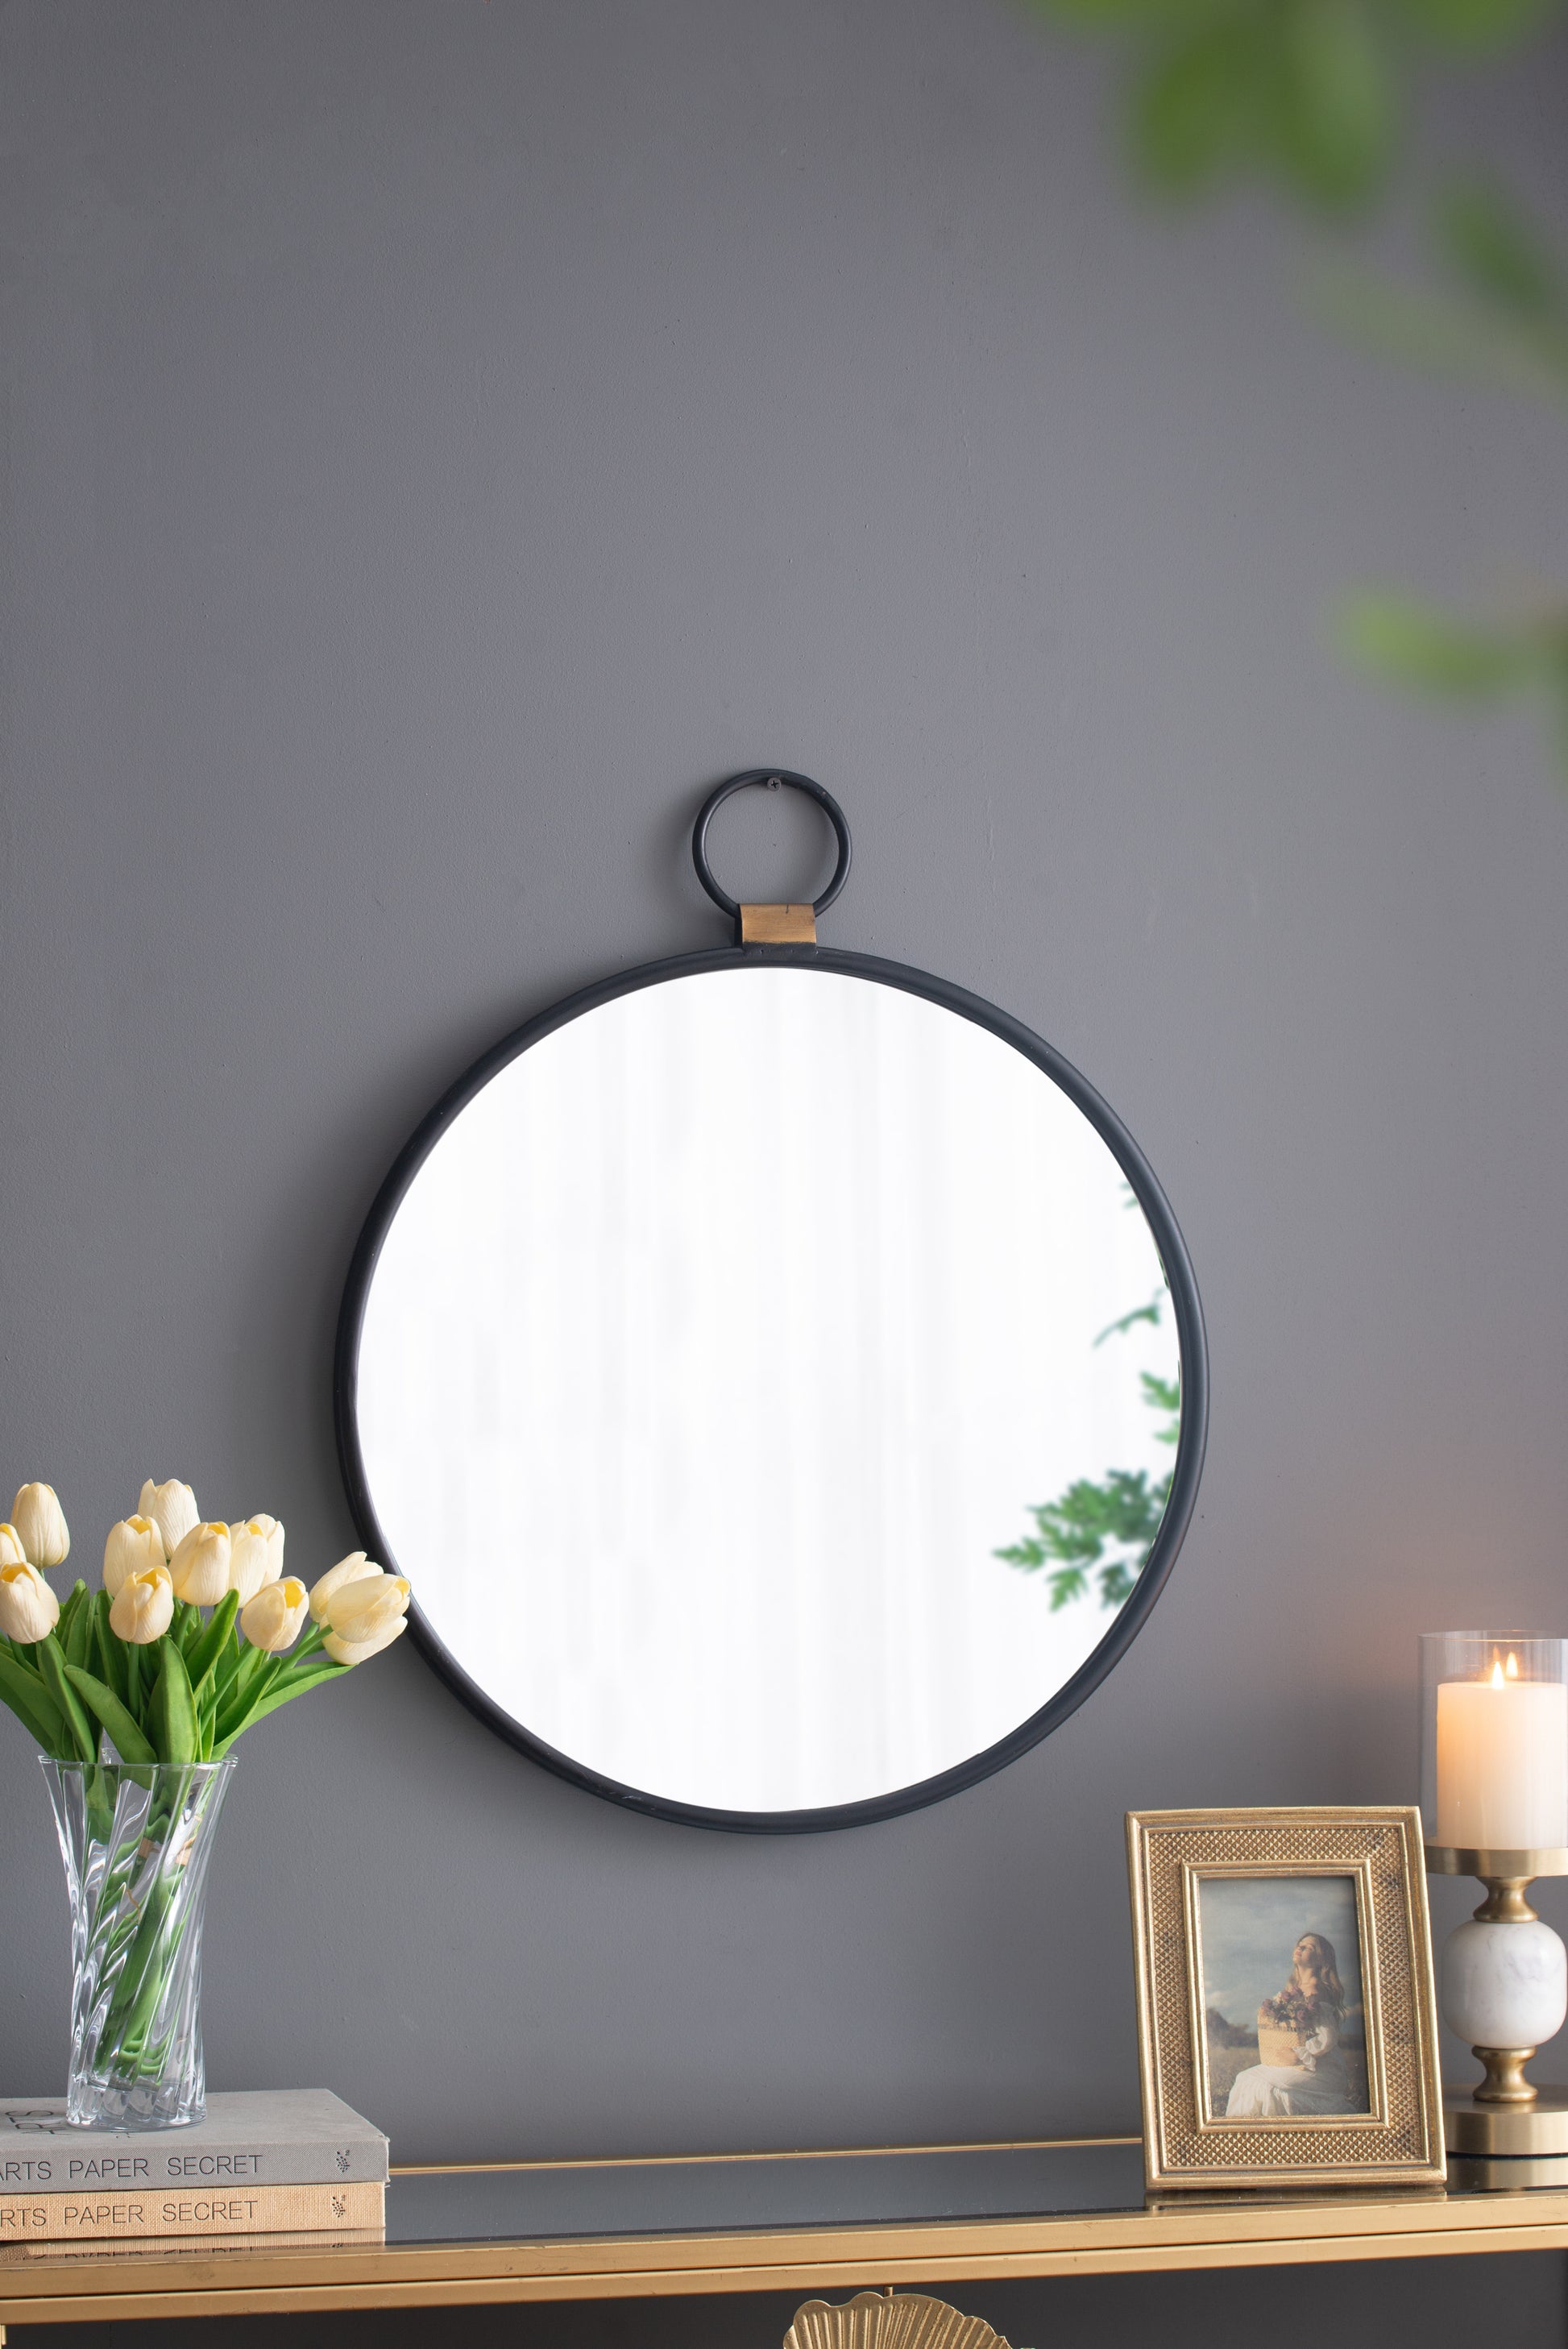 24" x 27" Wall Mirror with Black Frame, Contemporary black-iron